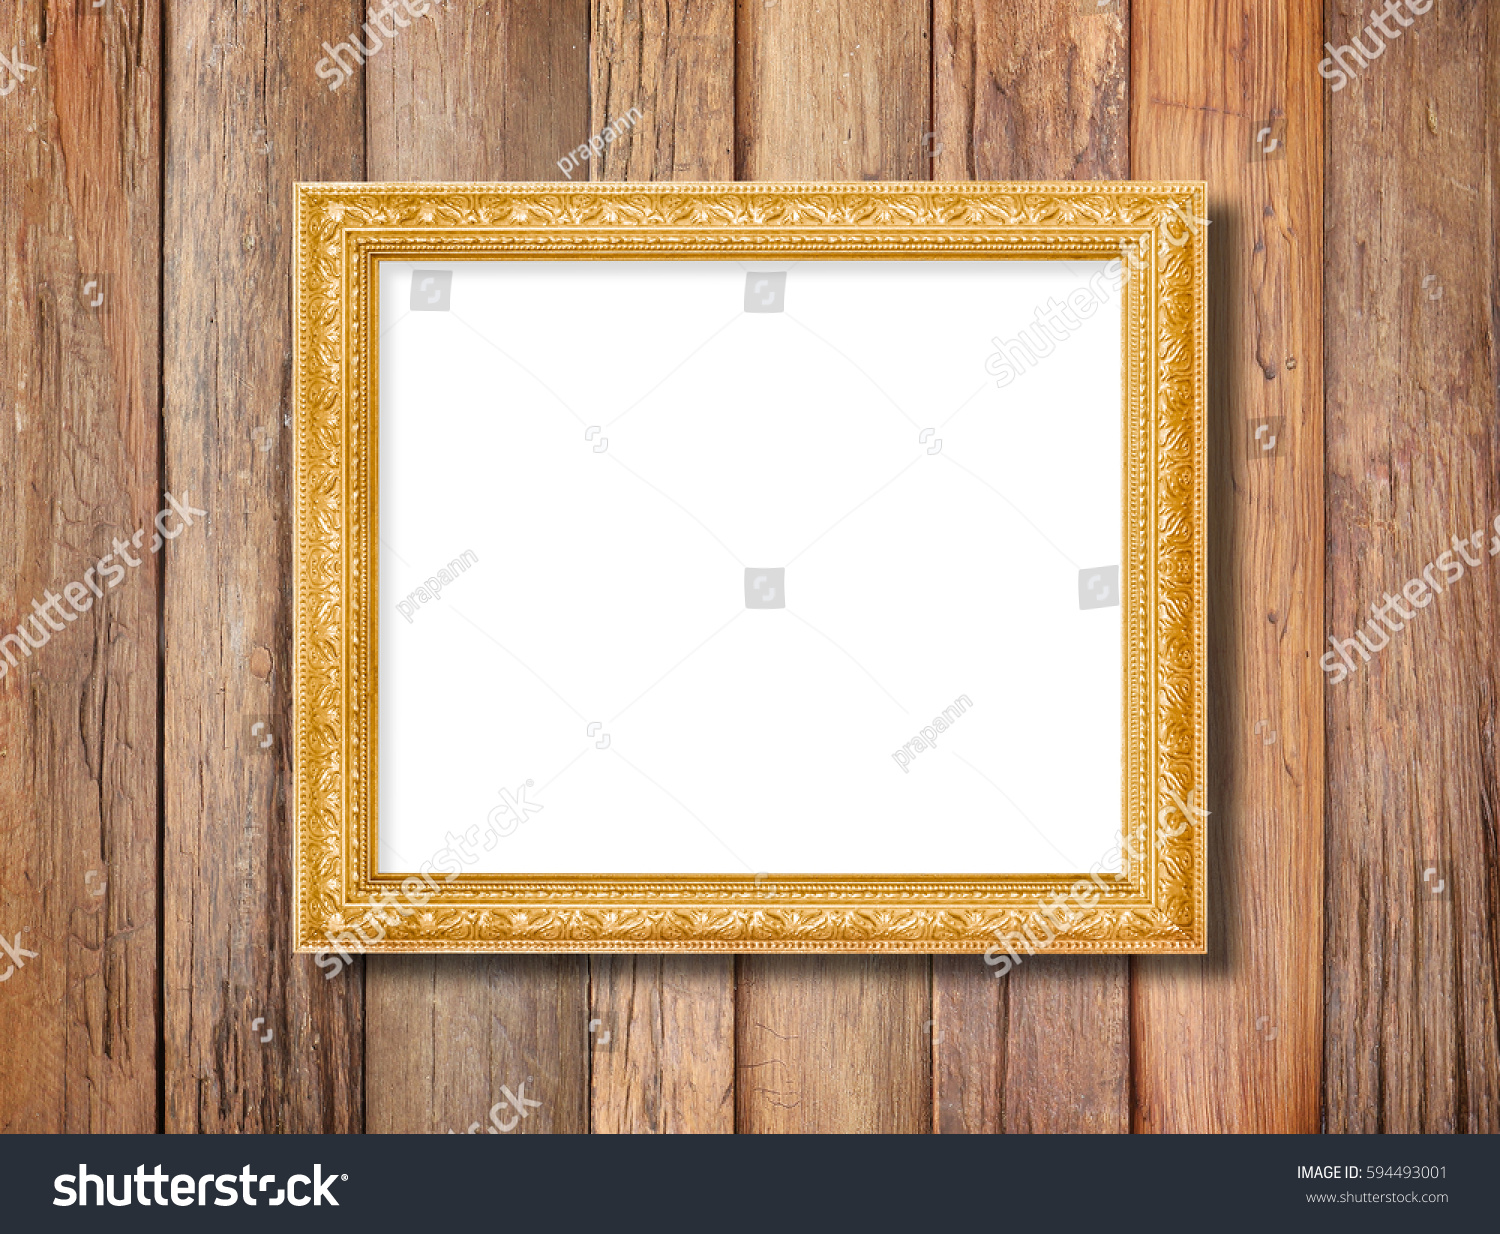 Antique gold frame on wooden wall background #594493001